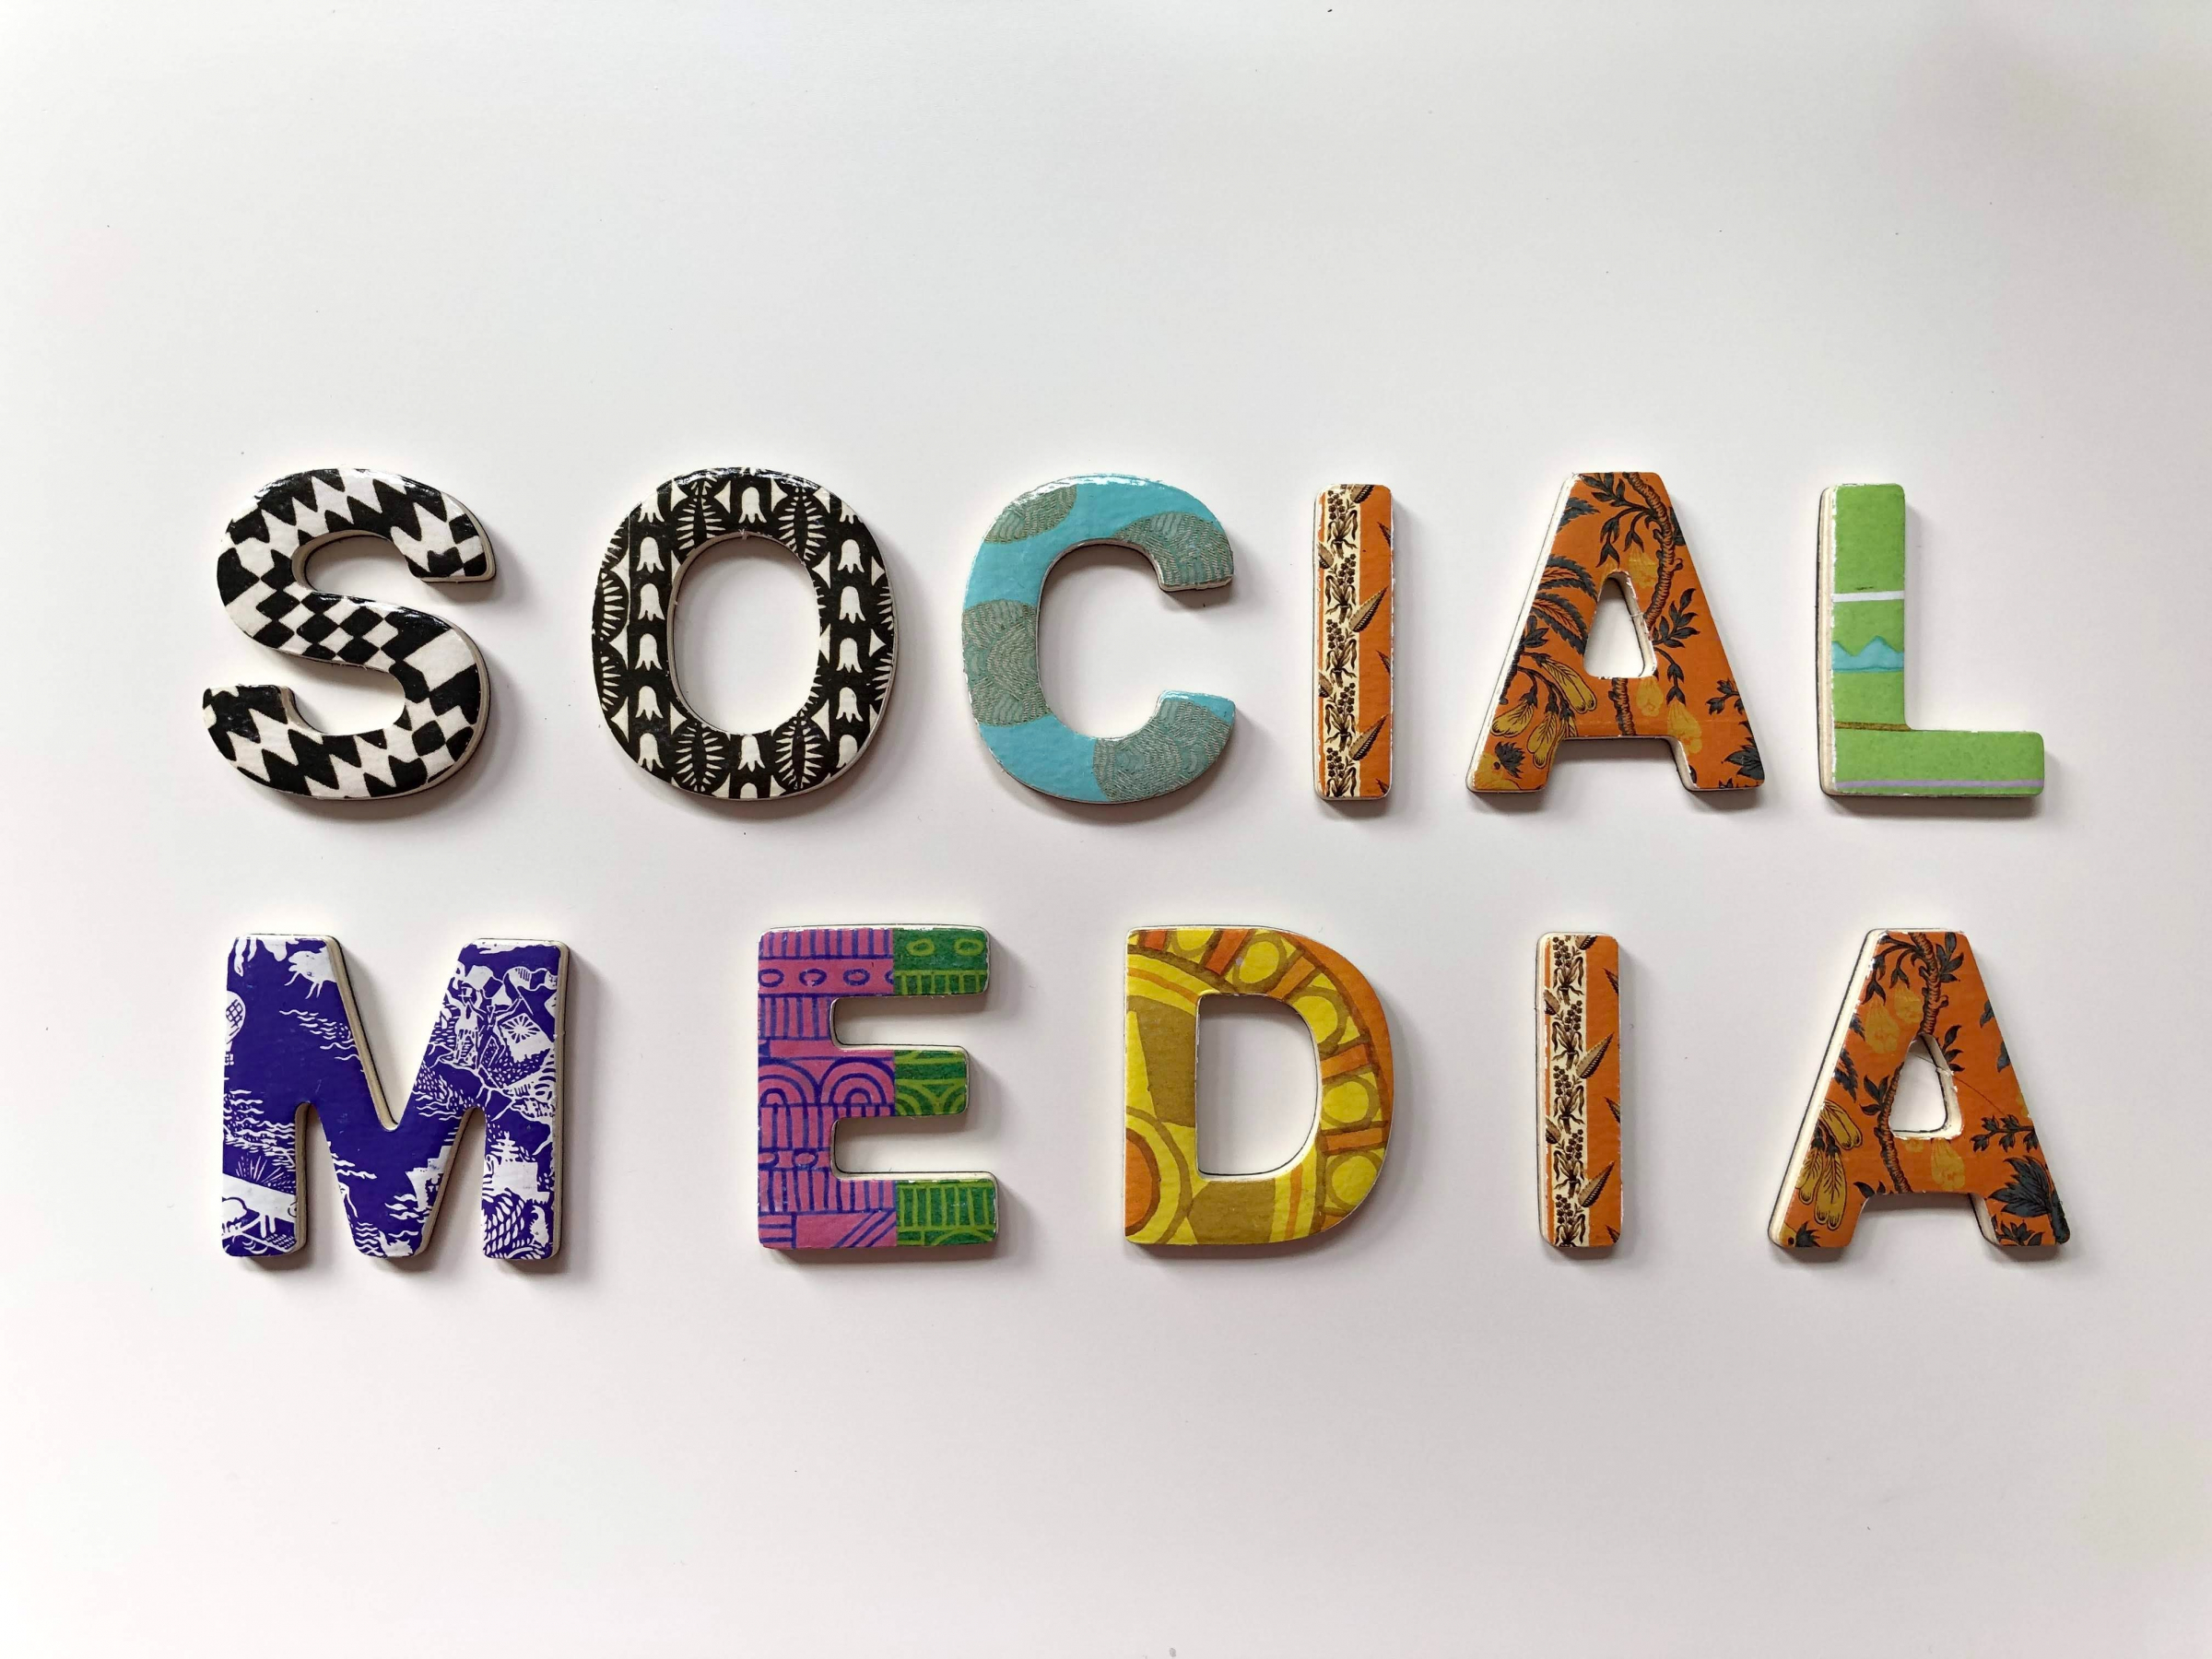 the words 'social media' spelled out in tiles